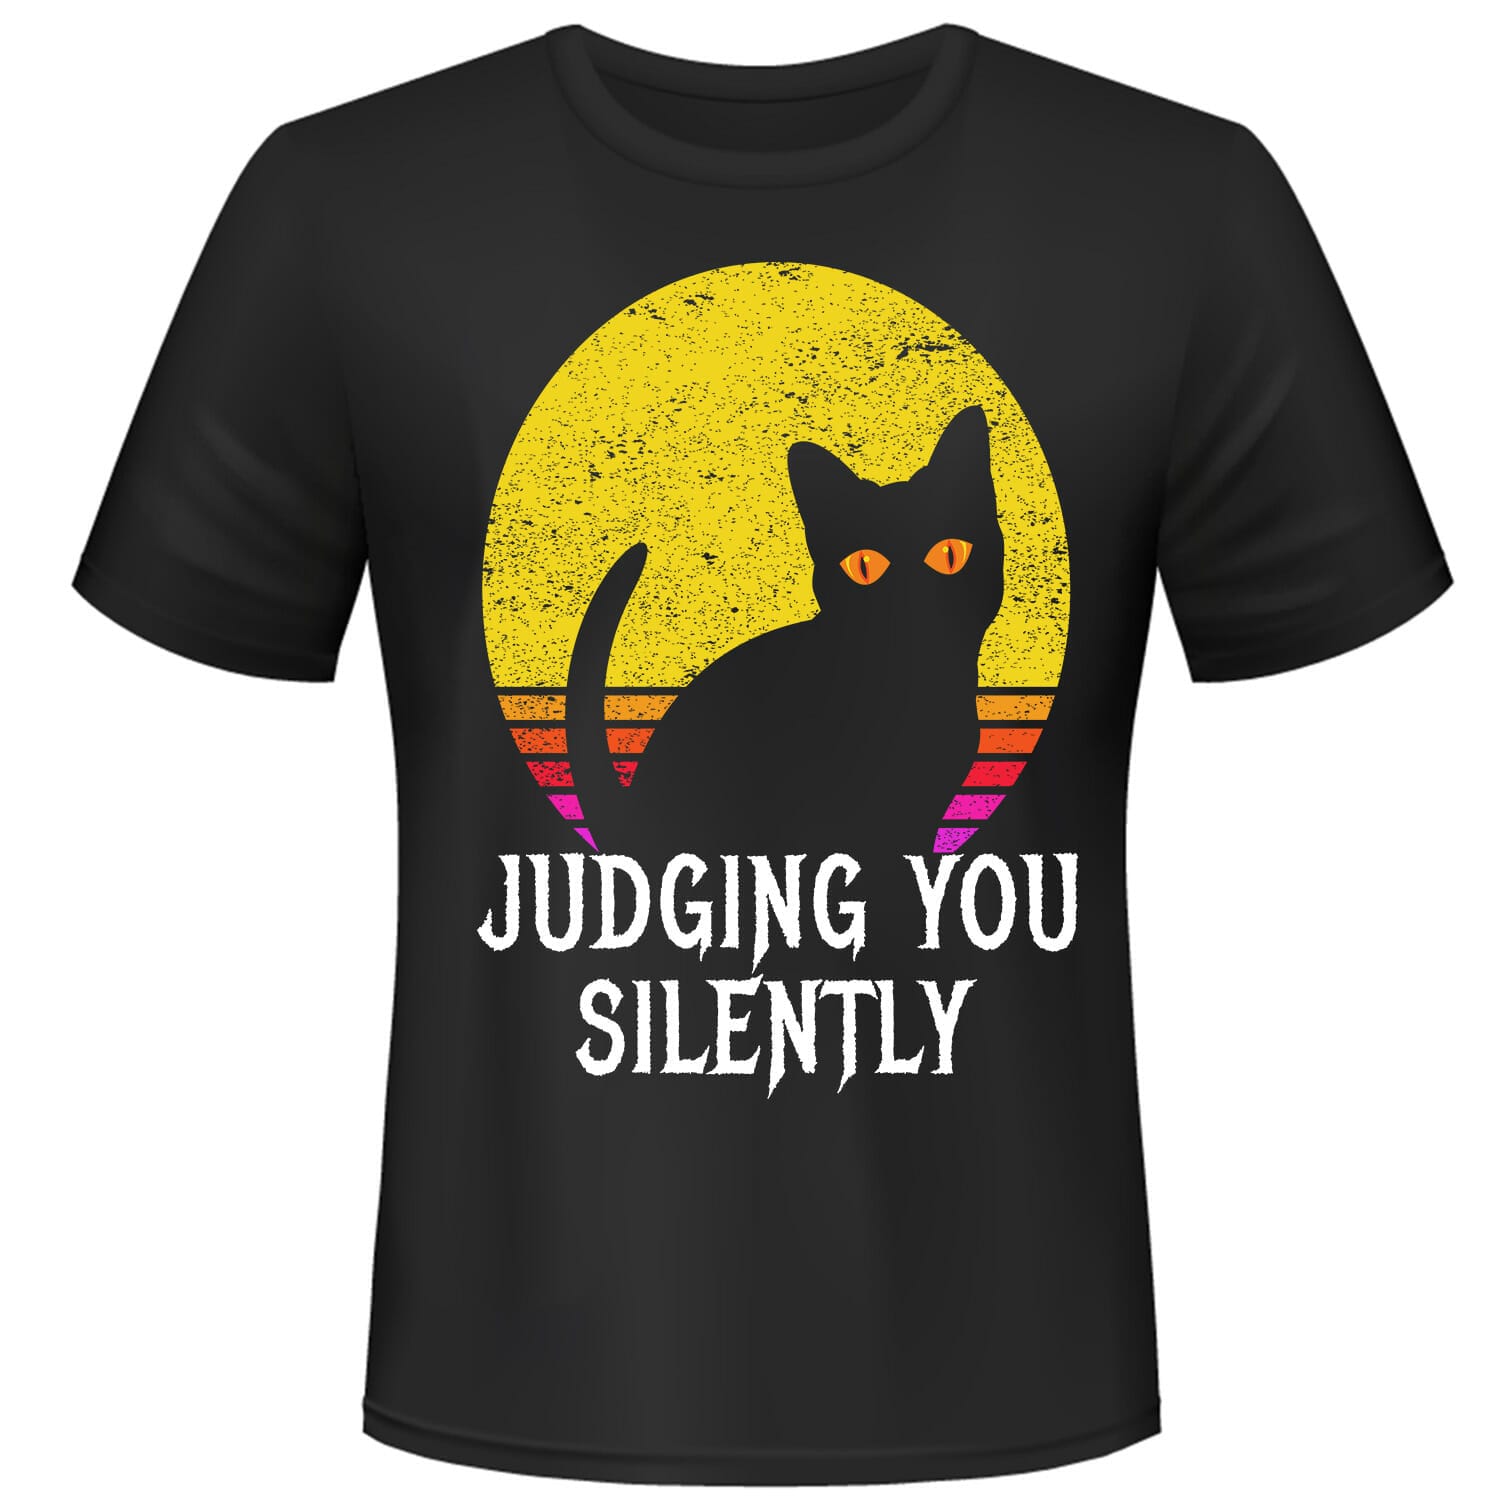 judging you silently funny cat tshirt design